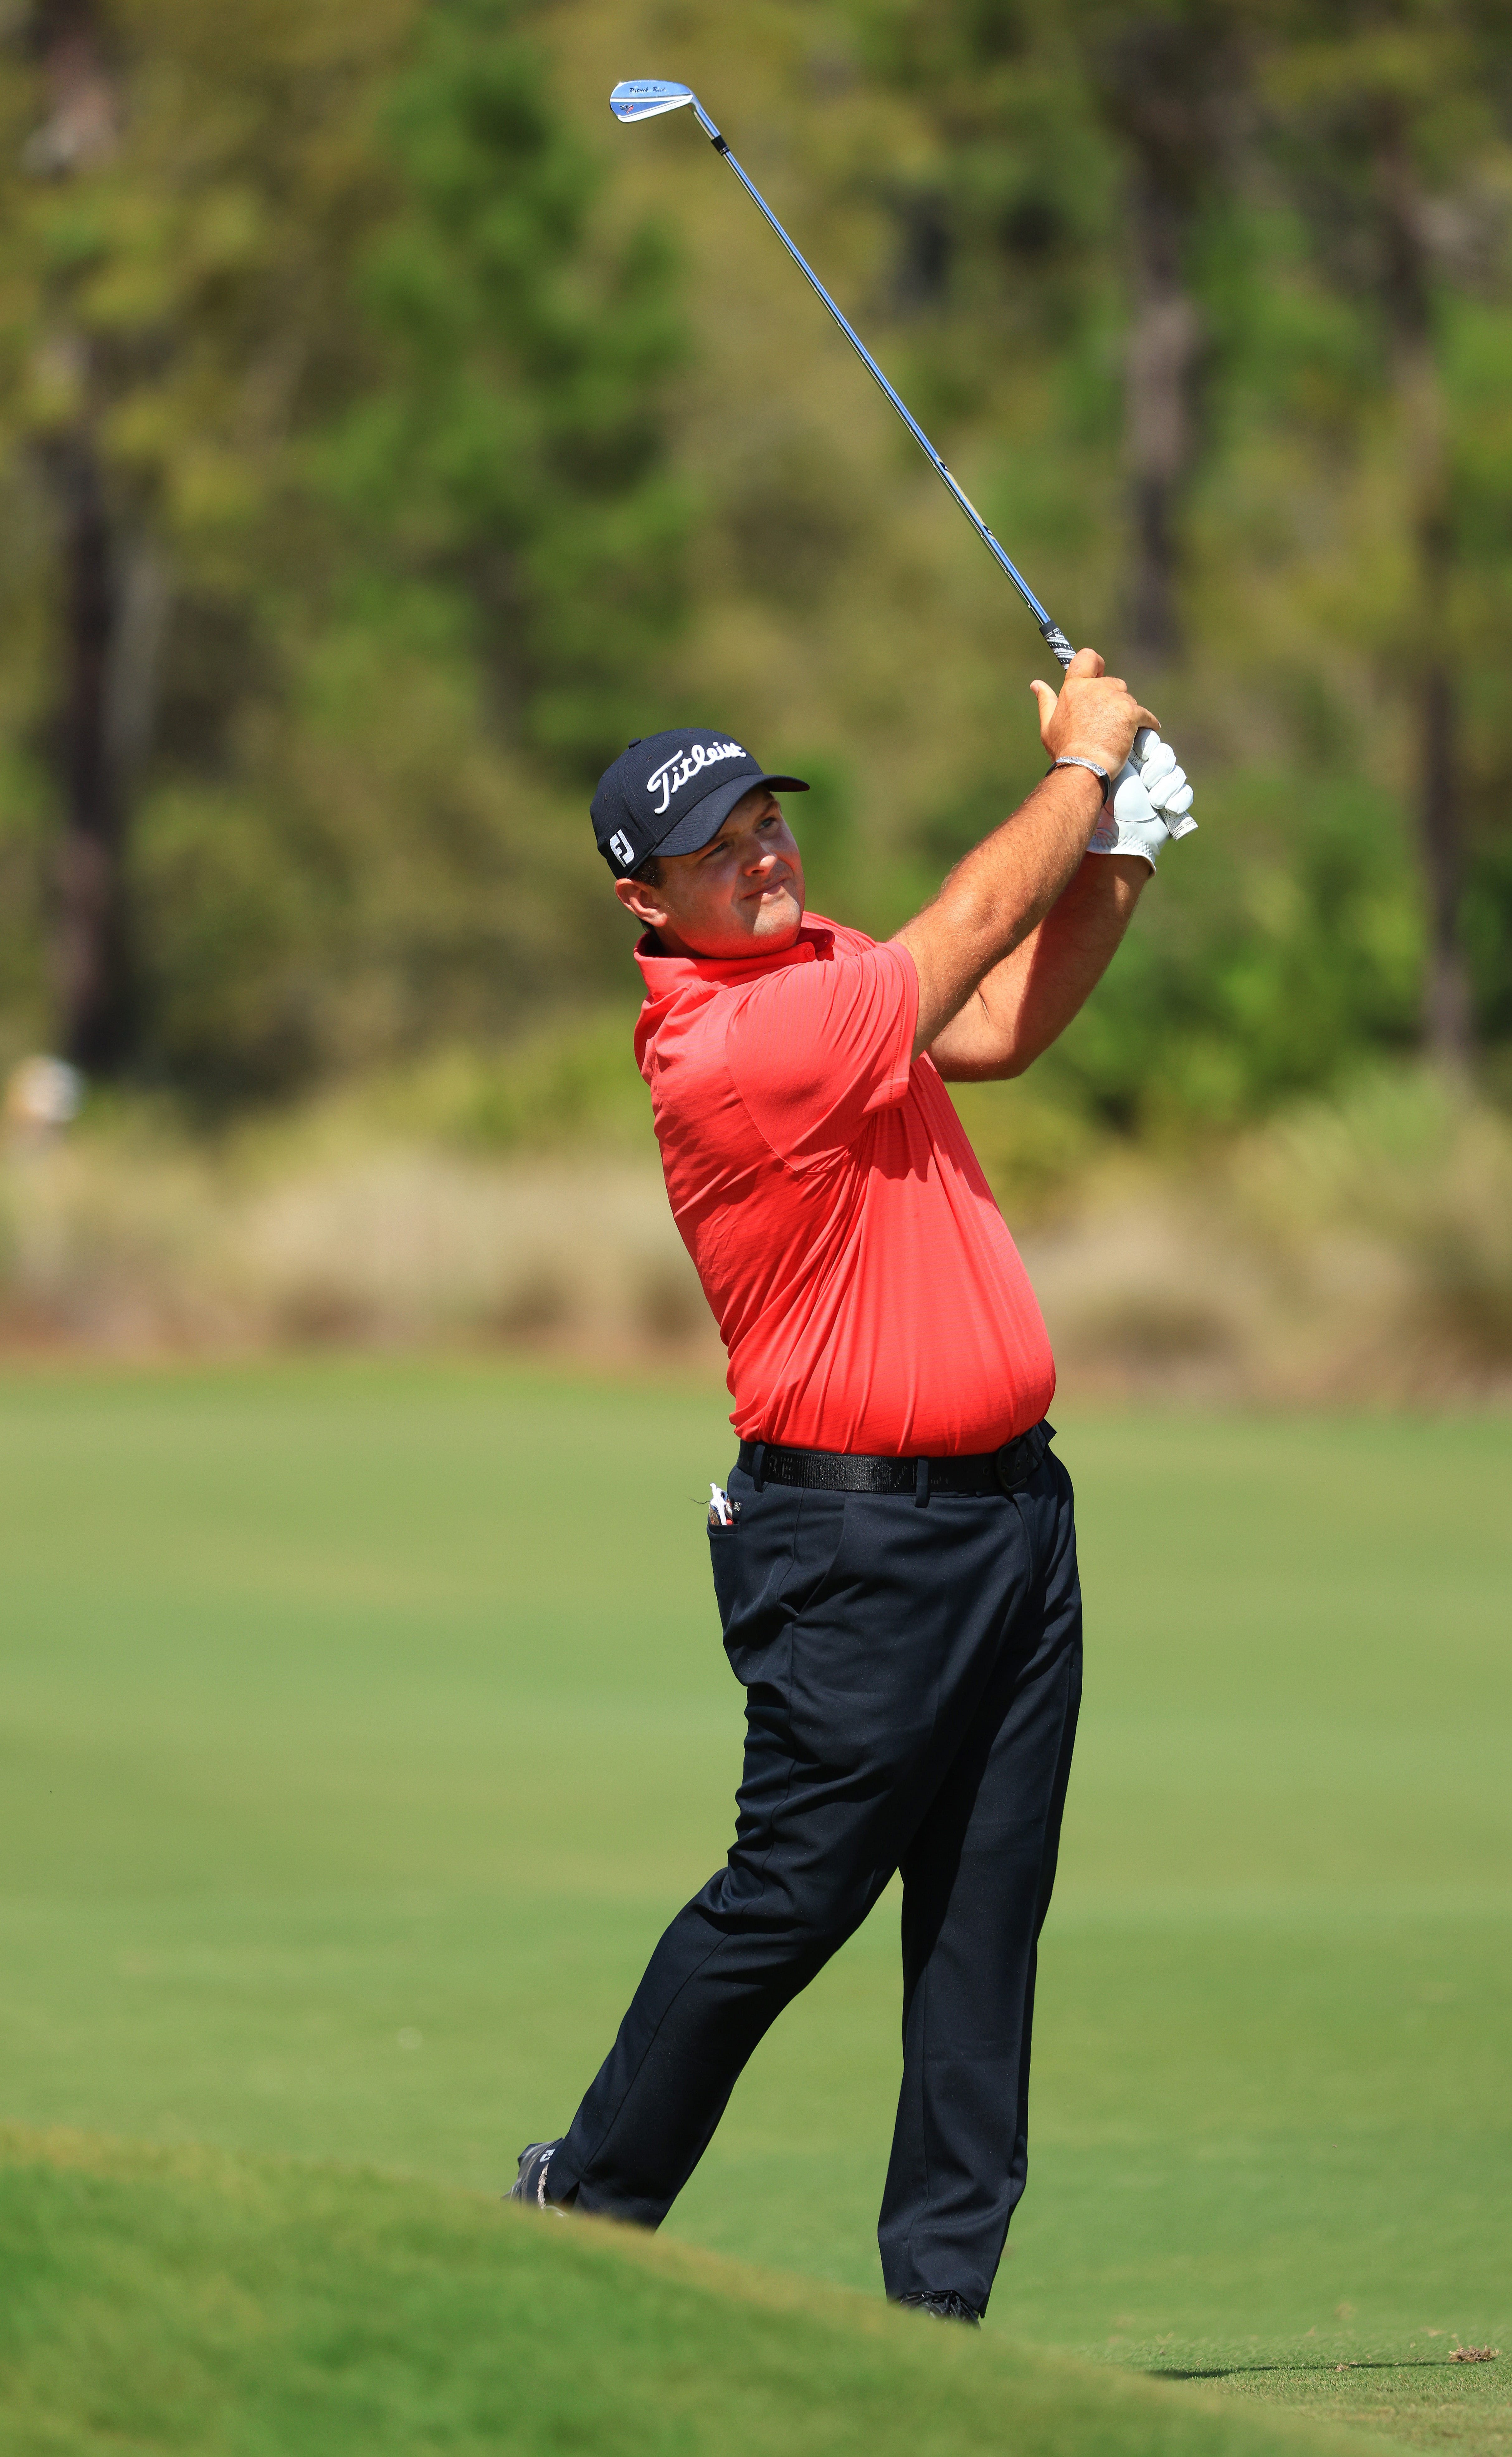 Patrick Reed during the final round of the World Golf Championships-Workday Championship in Bradenton, Florida.